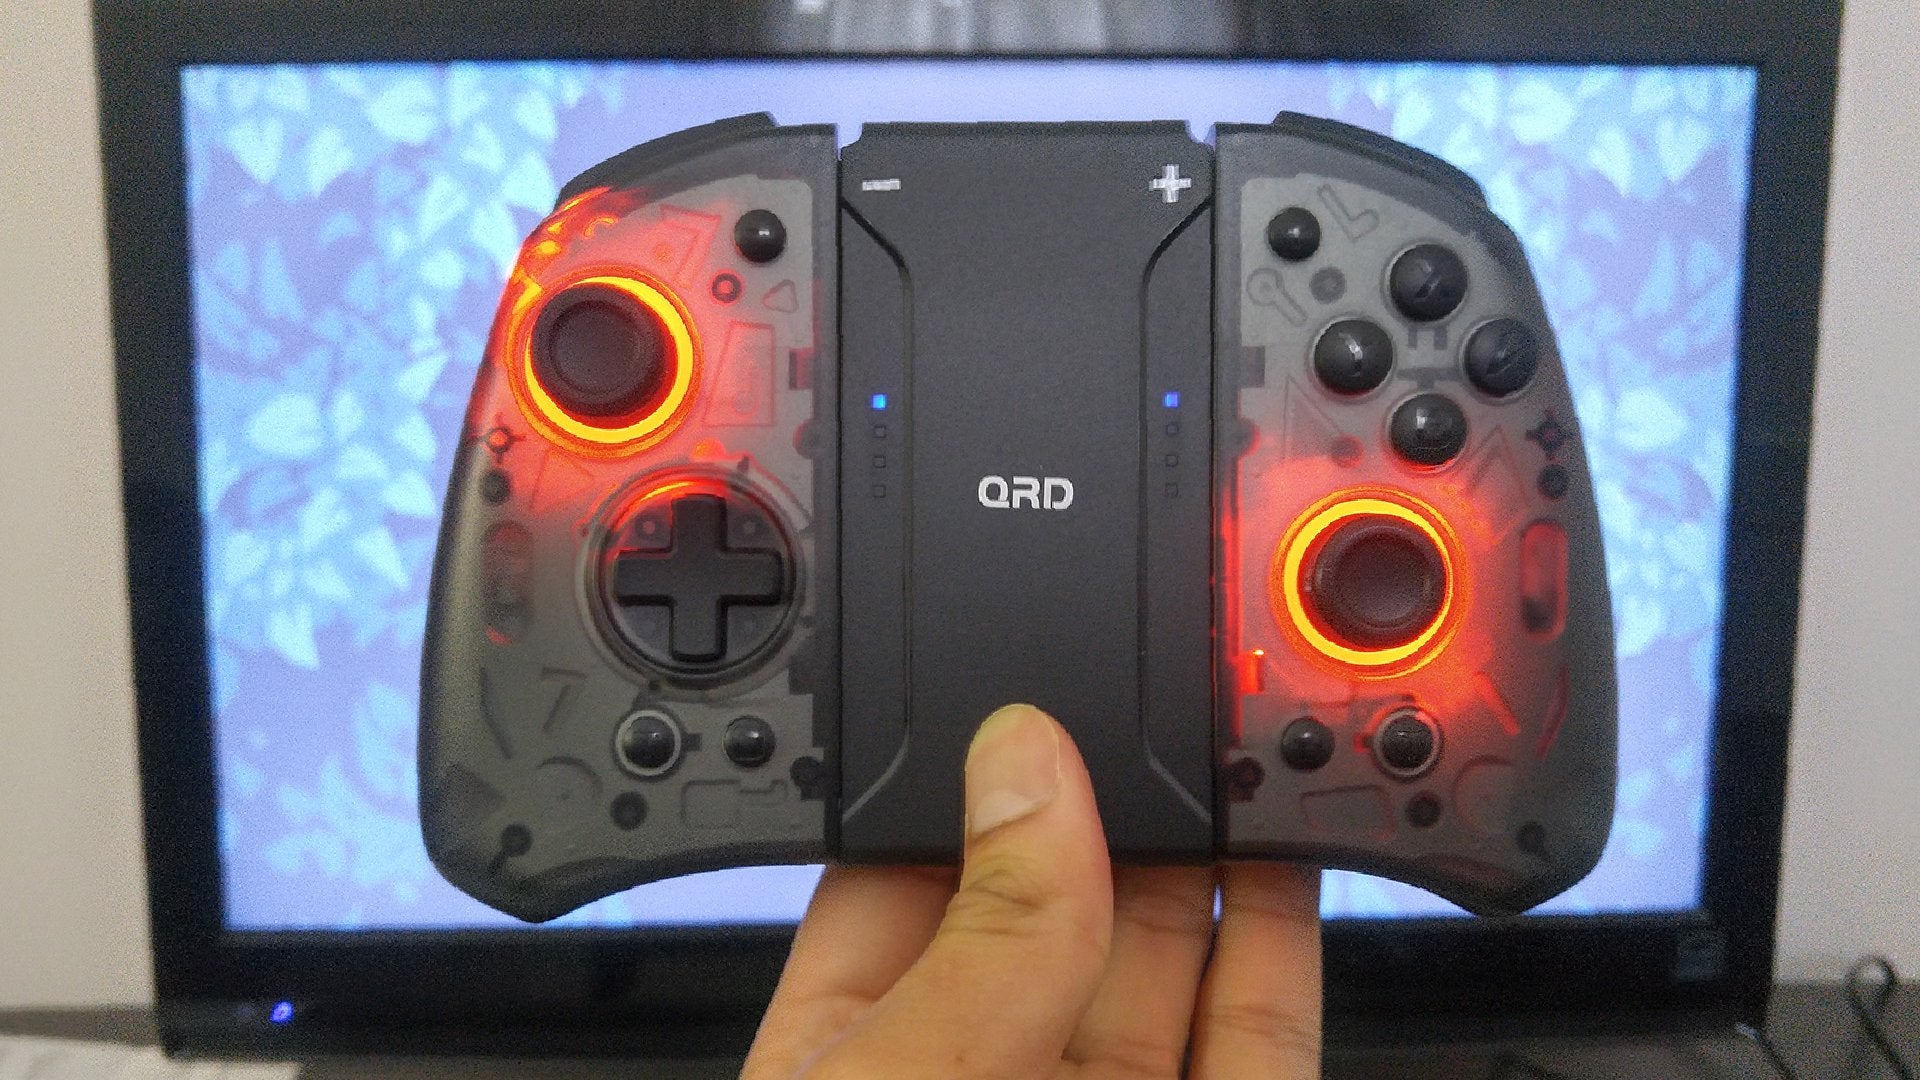 A hand holding up a gray Nintendo Switch controller in front of a monitor. The controller has glowing red lights.